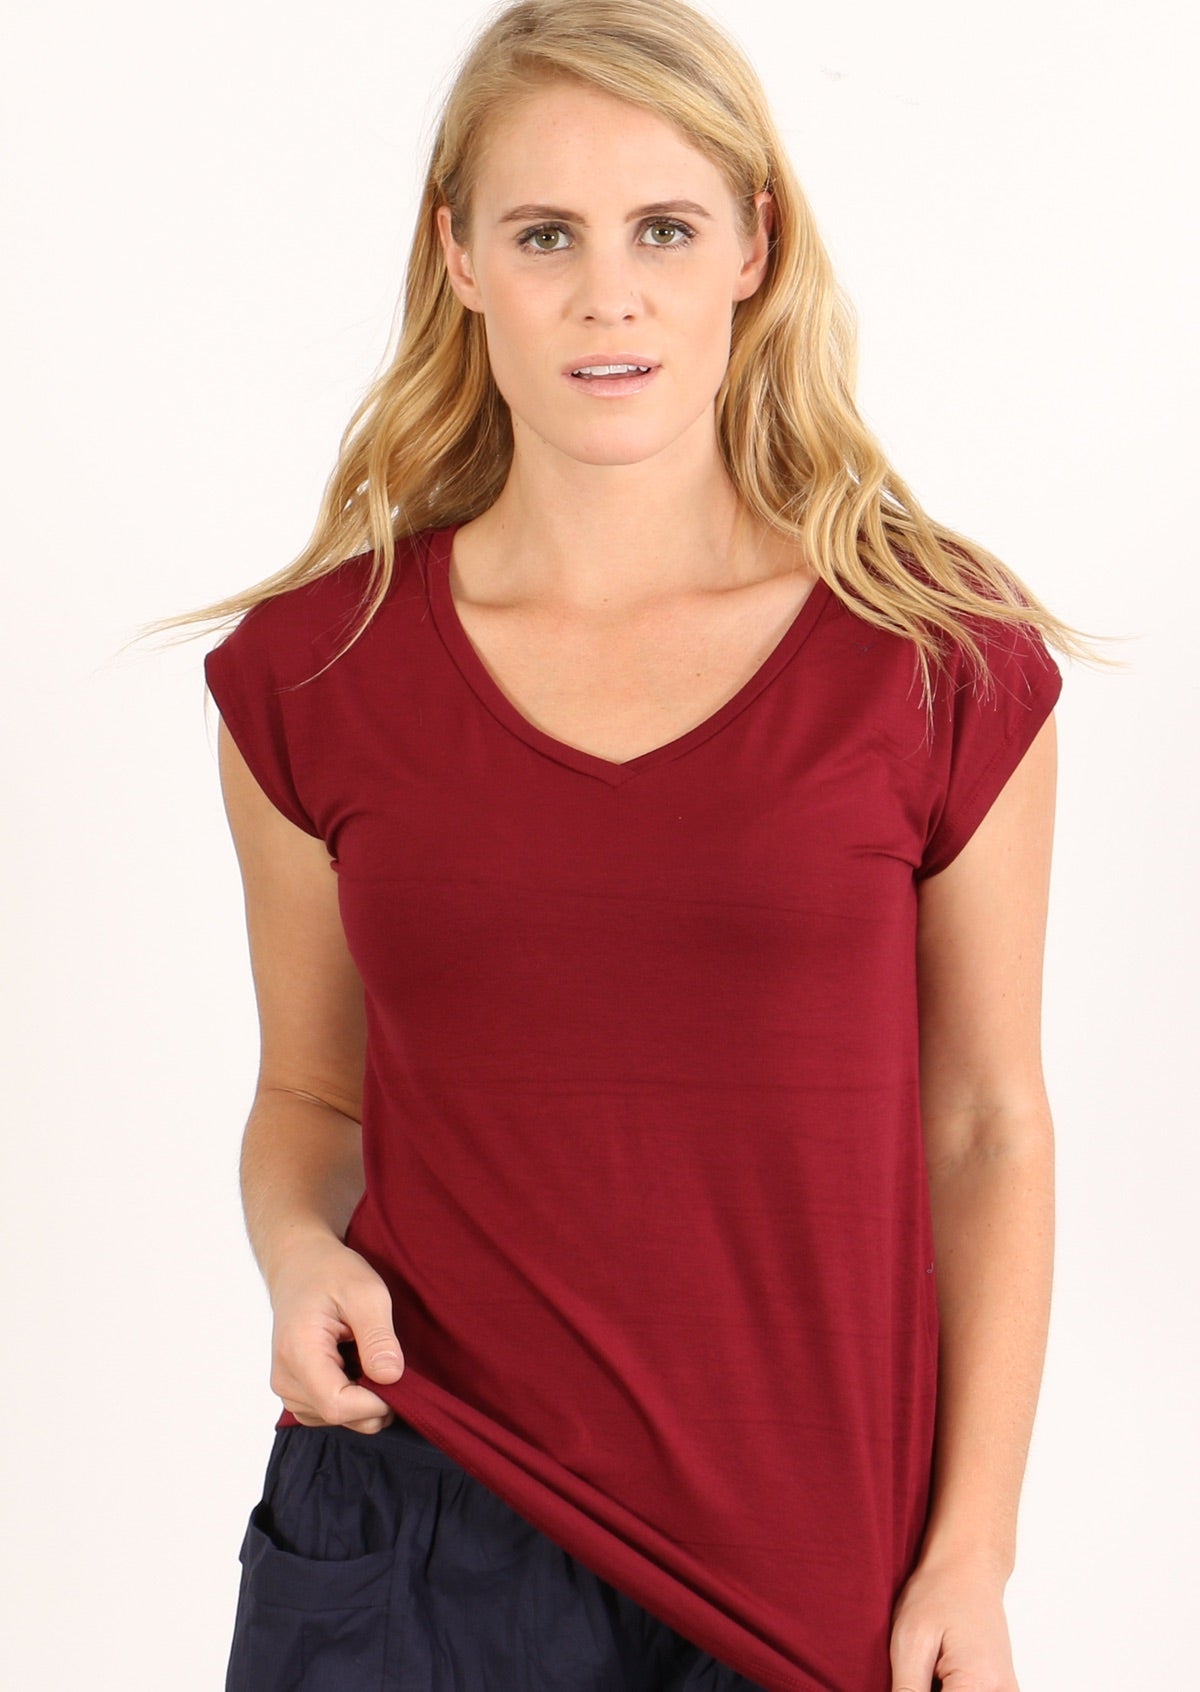 Woman with blonde hair wearing a maroon v-neck short cap sleeve rayon top